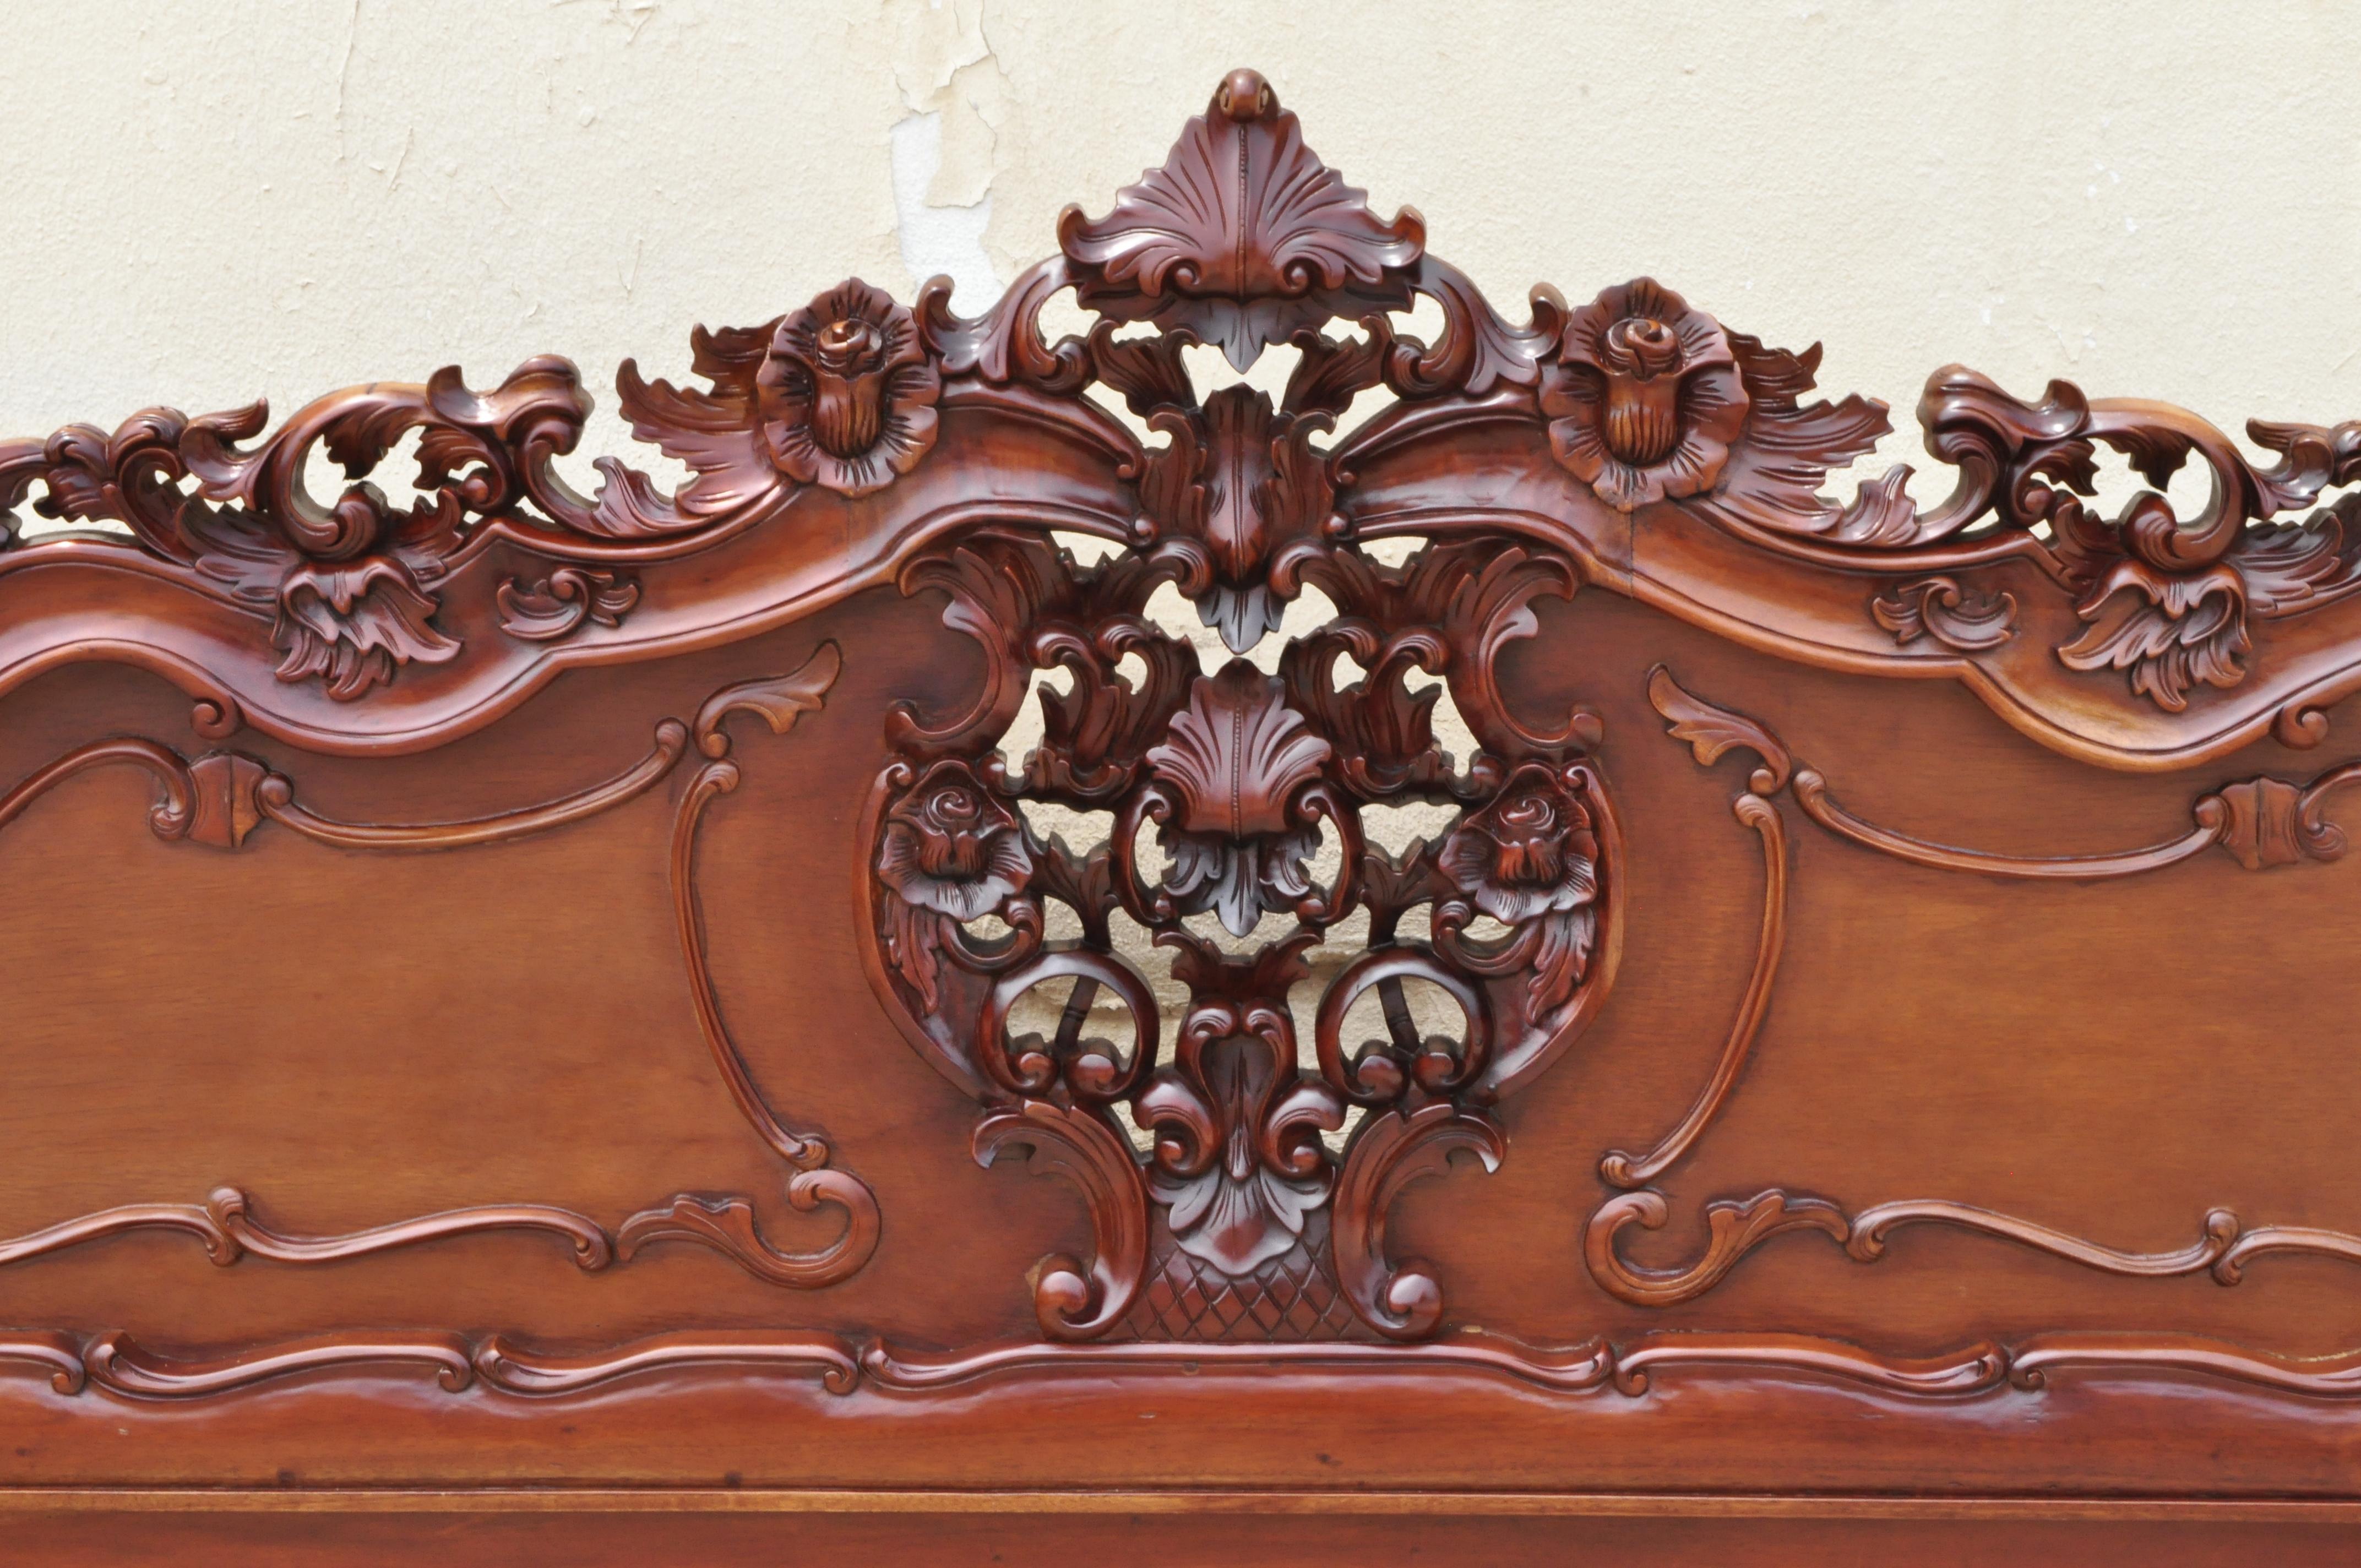 King size carved wood French rococo style ornate fancy bed frame. Item features king size frame headboard, footboard, 2 rails, solid wood construction, beautiful wood grain, nicely carved details, circa late 20th century. Measurements: Headboard: